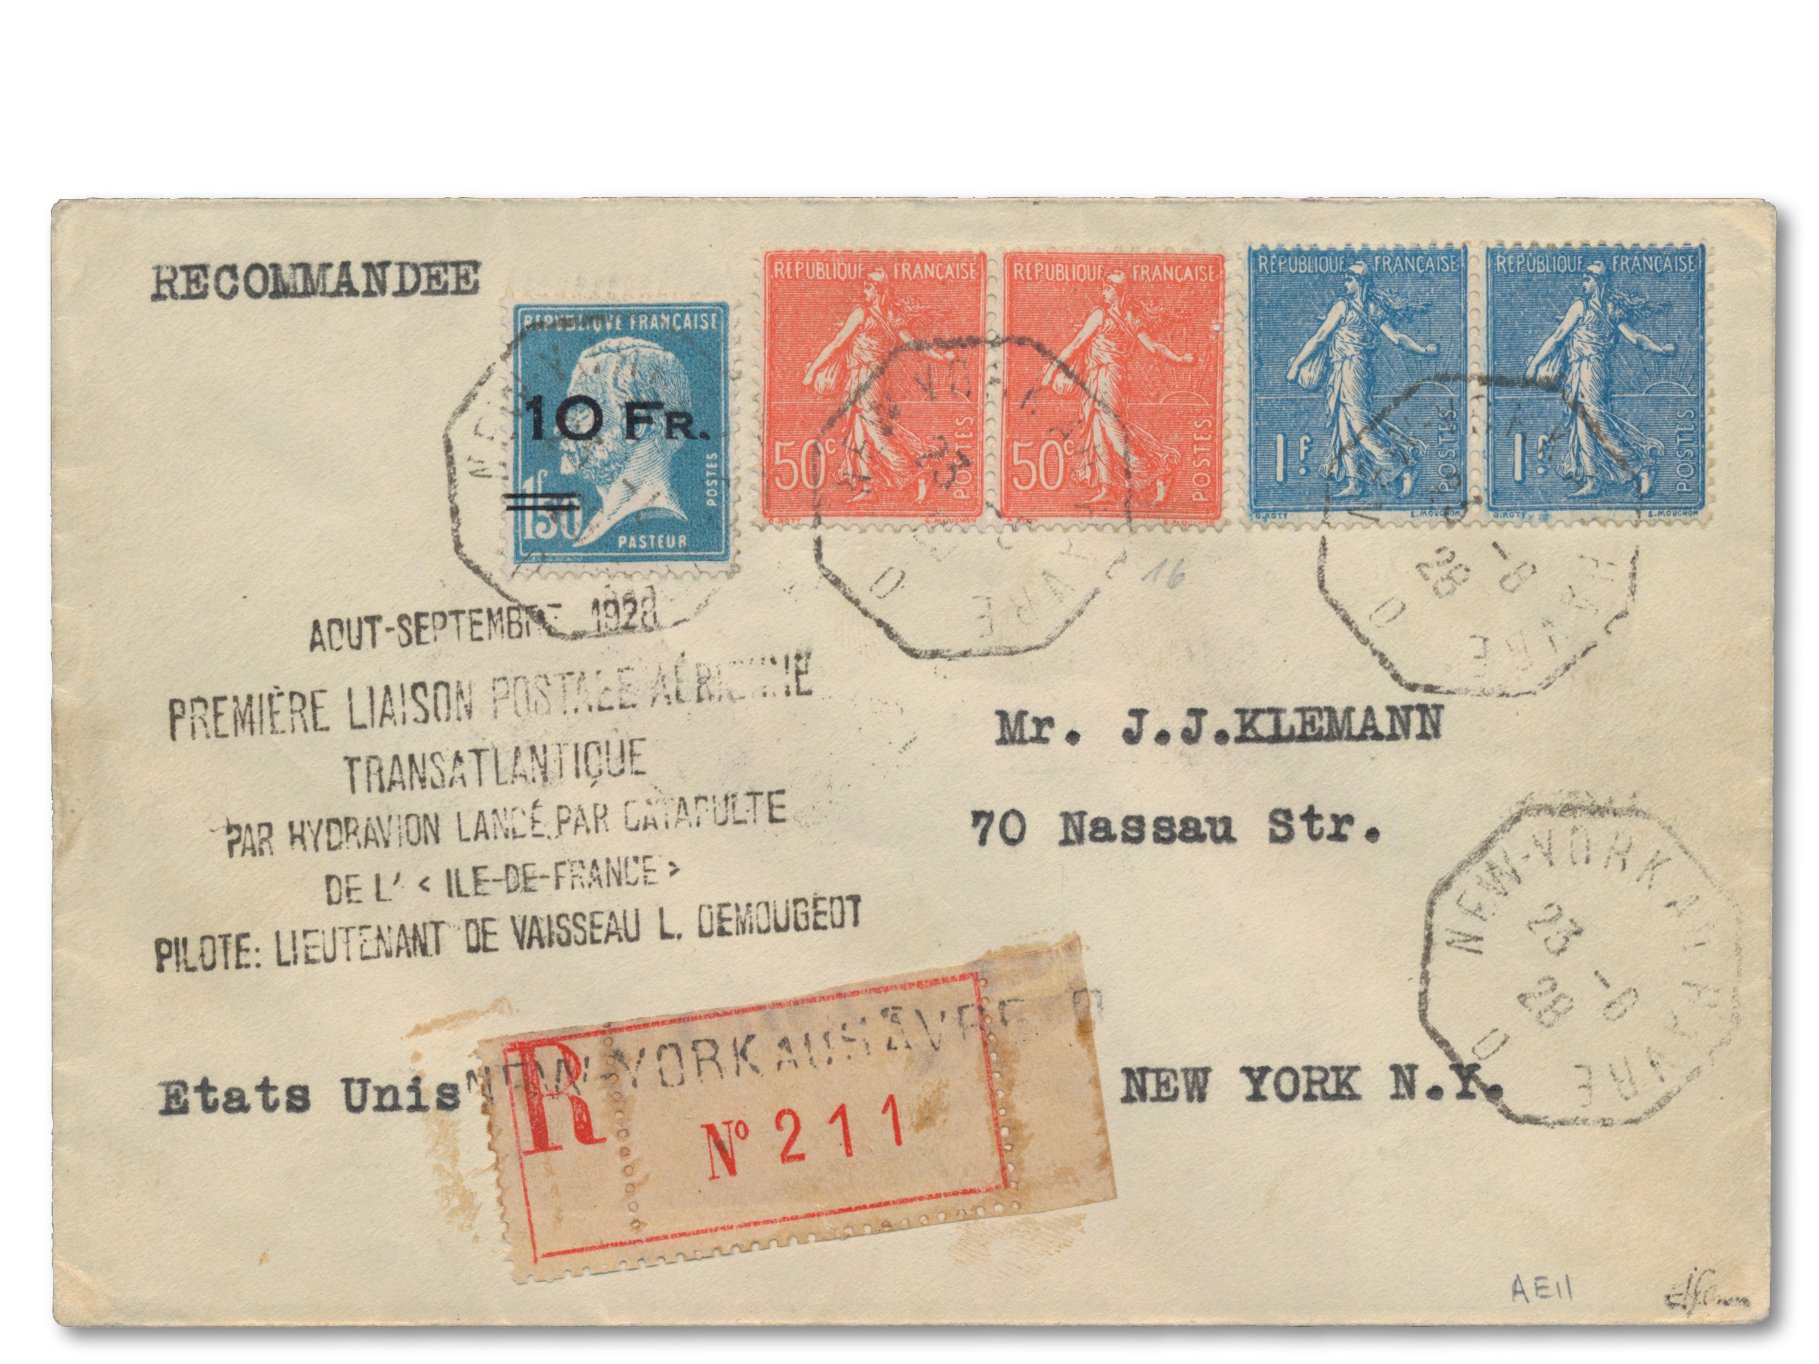 registered letter to New York 1928 cancelled with the first Ile de France catapult flight handstamp